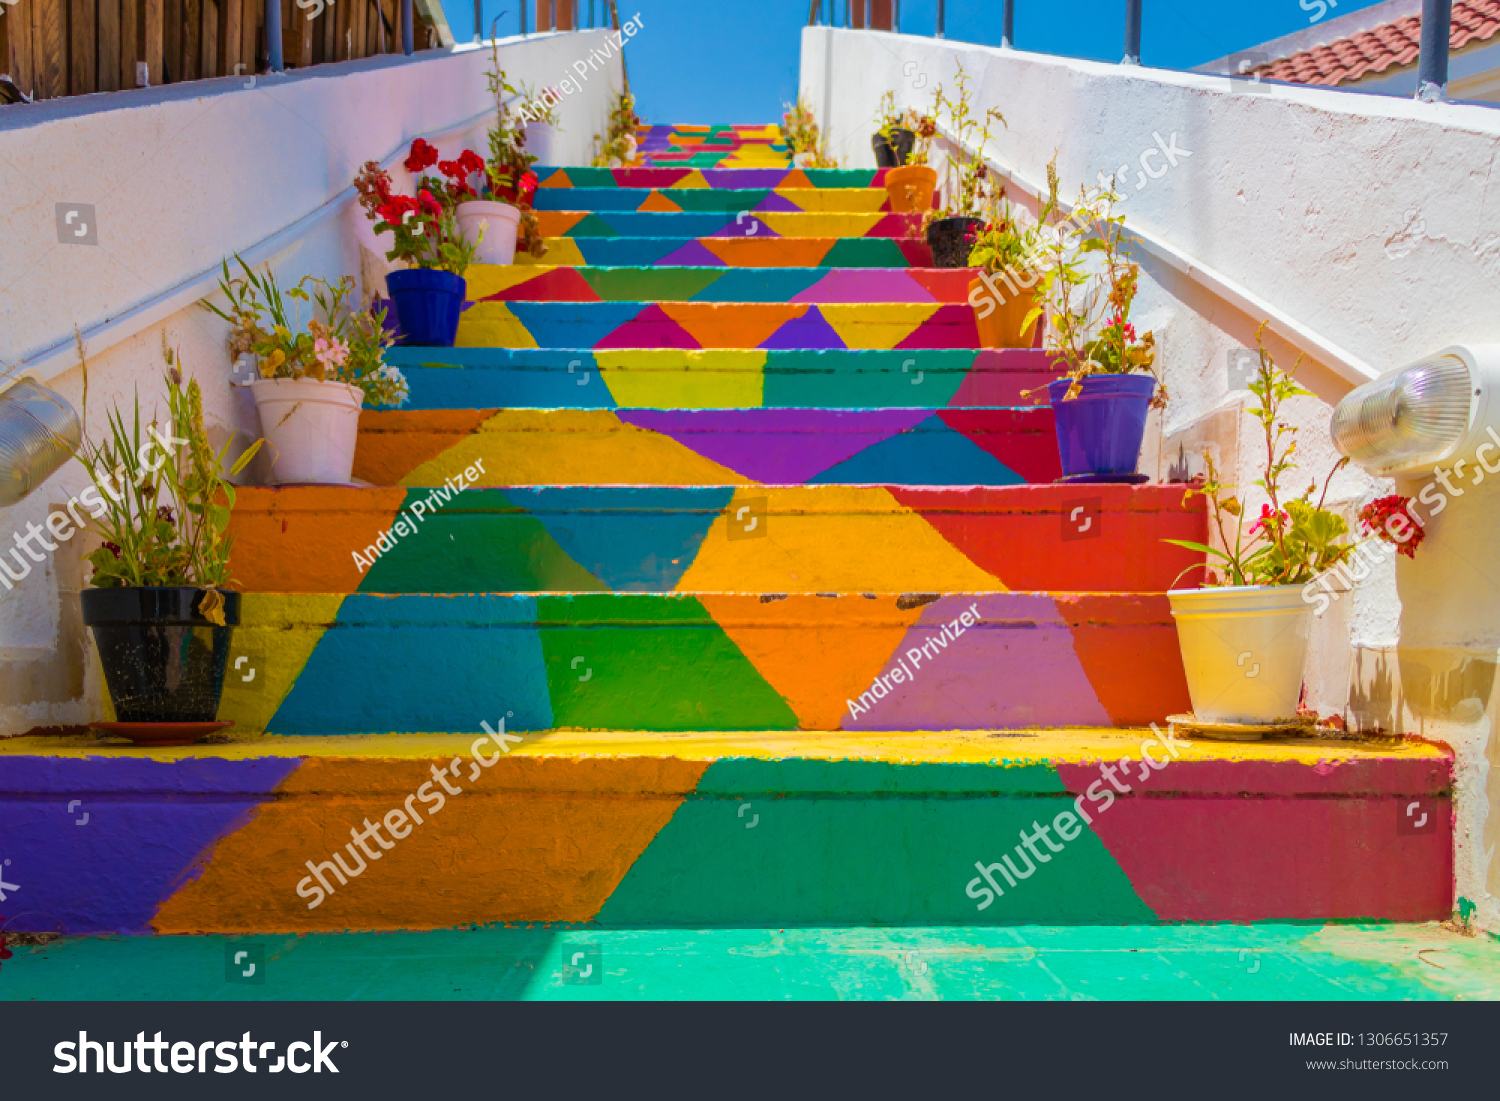 Colorful stairs In the street in Tunis, Tunisia #1306651357